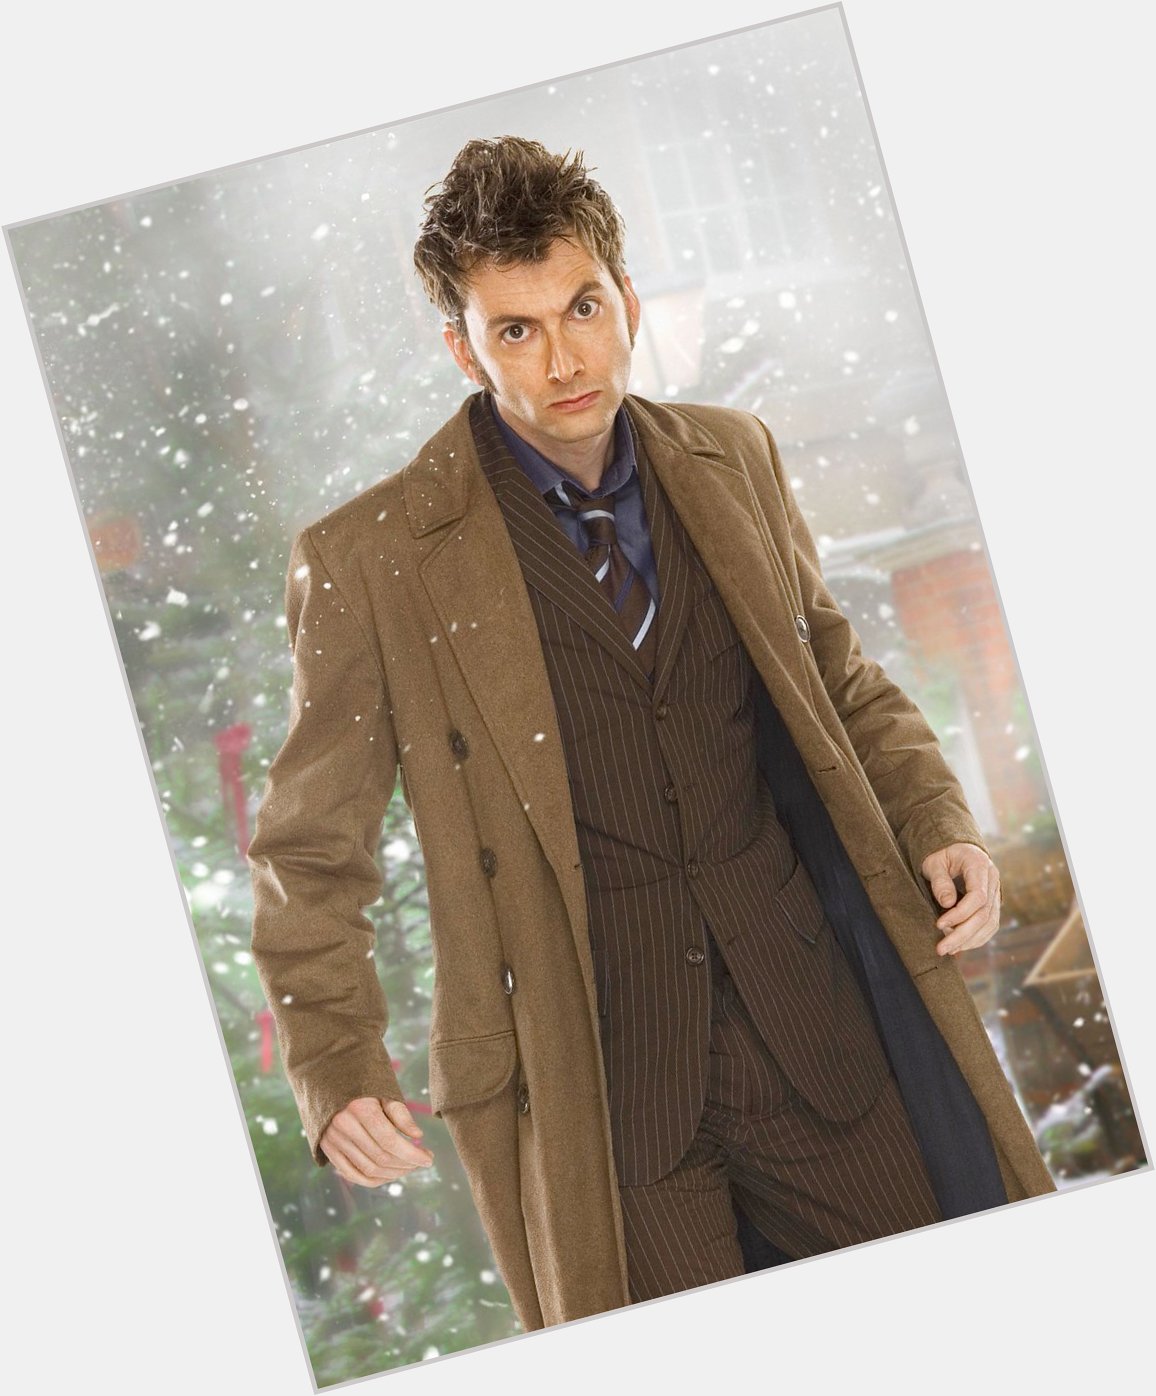 Happy 50th Birthday to The Tenth Doctor himself David Tennant!  